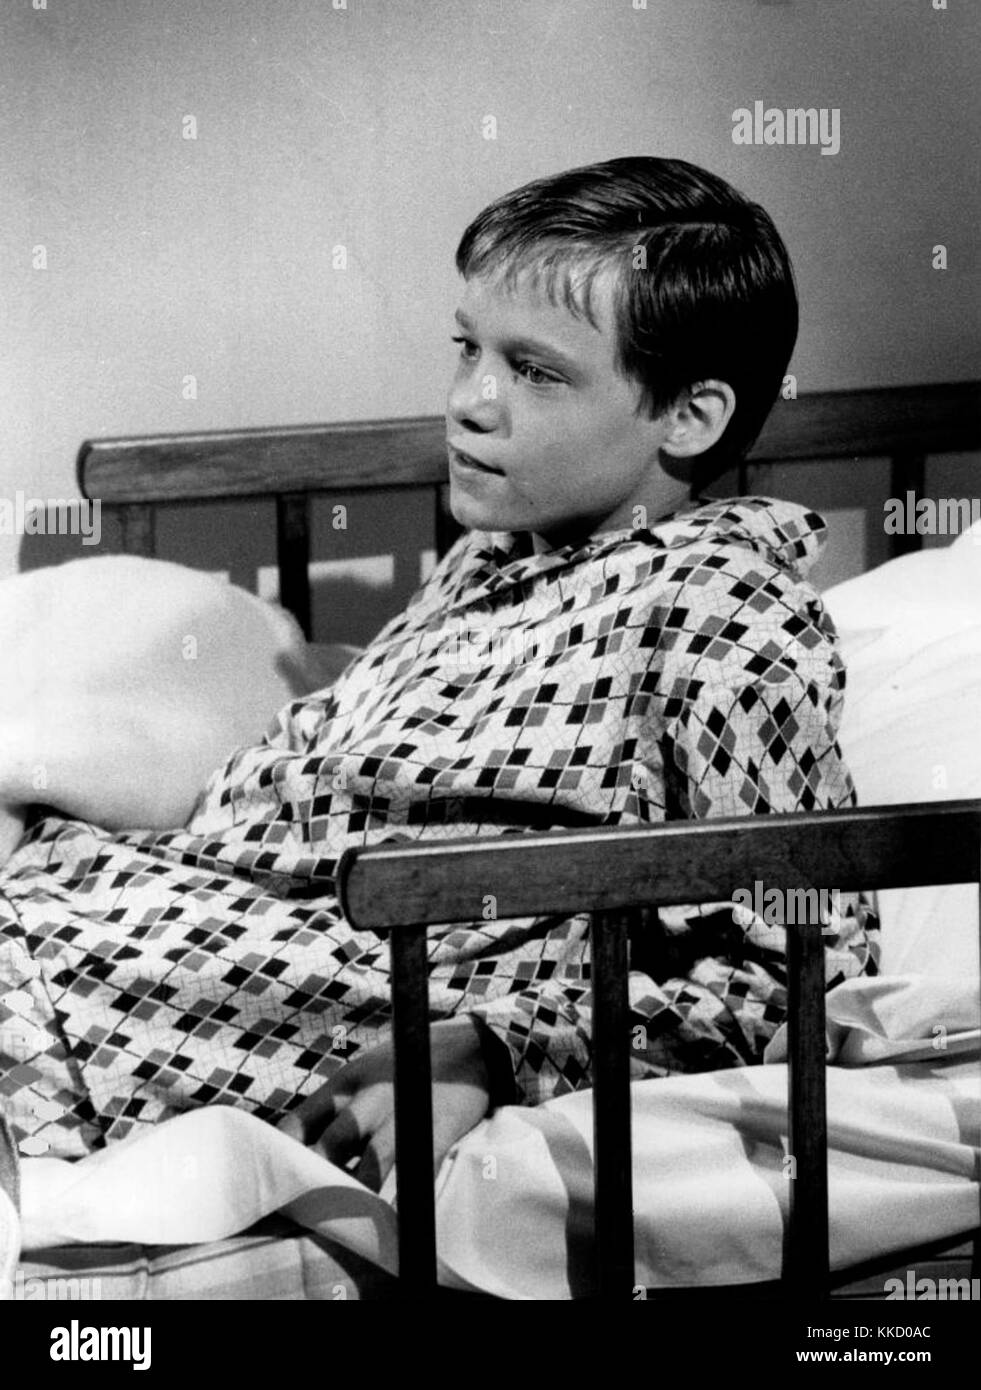 JUL 19 1977  Bed Wetter -- Lance Kerwin stars in 'The Loneliest Runner,' an NBC-TV movie to be repeated on Thursday, July 14 (8-9:30 p.m. PT). The drama is the touching story about a 13-year-old whose life is miserable because he still wets his bed and receives little understanding from his parents. The movie was written and directed by Michael Landon, star of the network's 'Little House on the Prairie.' The Loneliest Runner Lance Kerwin 1976 Stock Photo